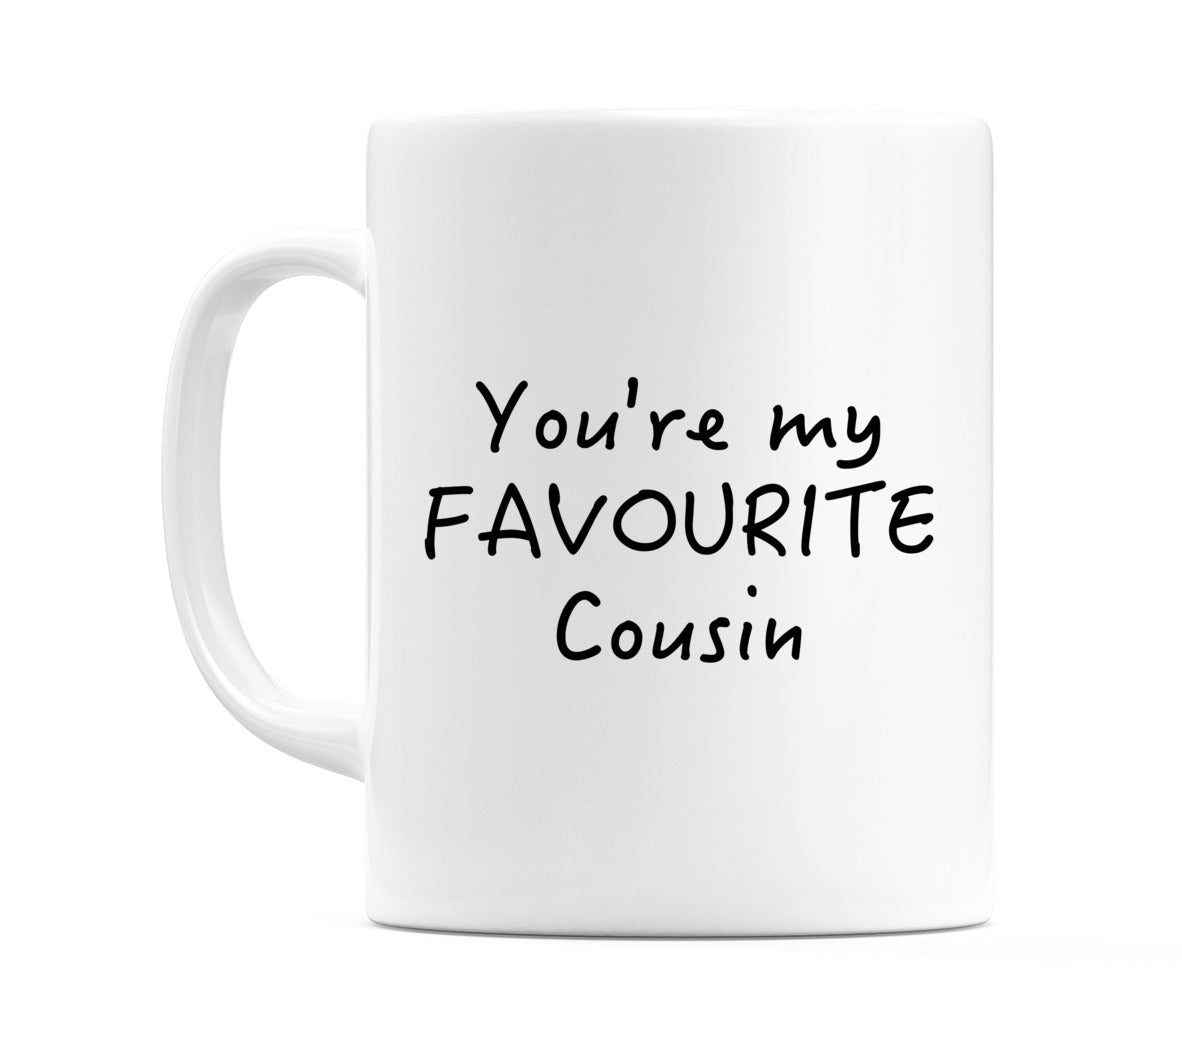 Mug with You're my Favourite Cousin written on it.